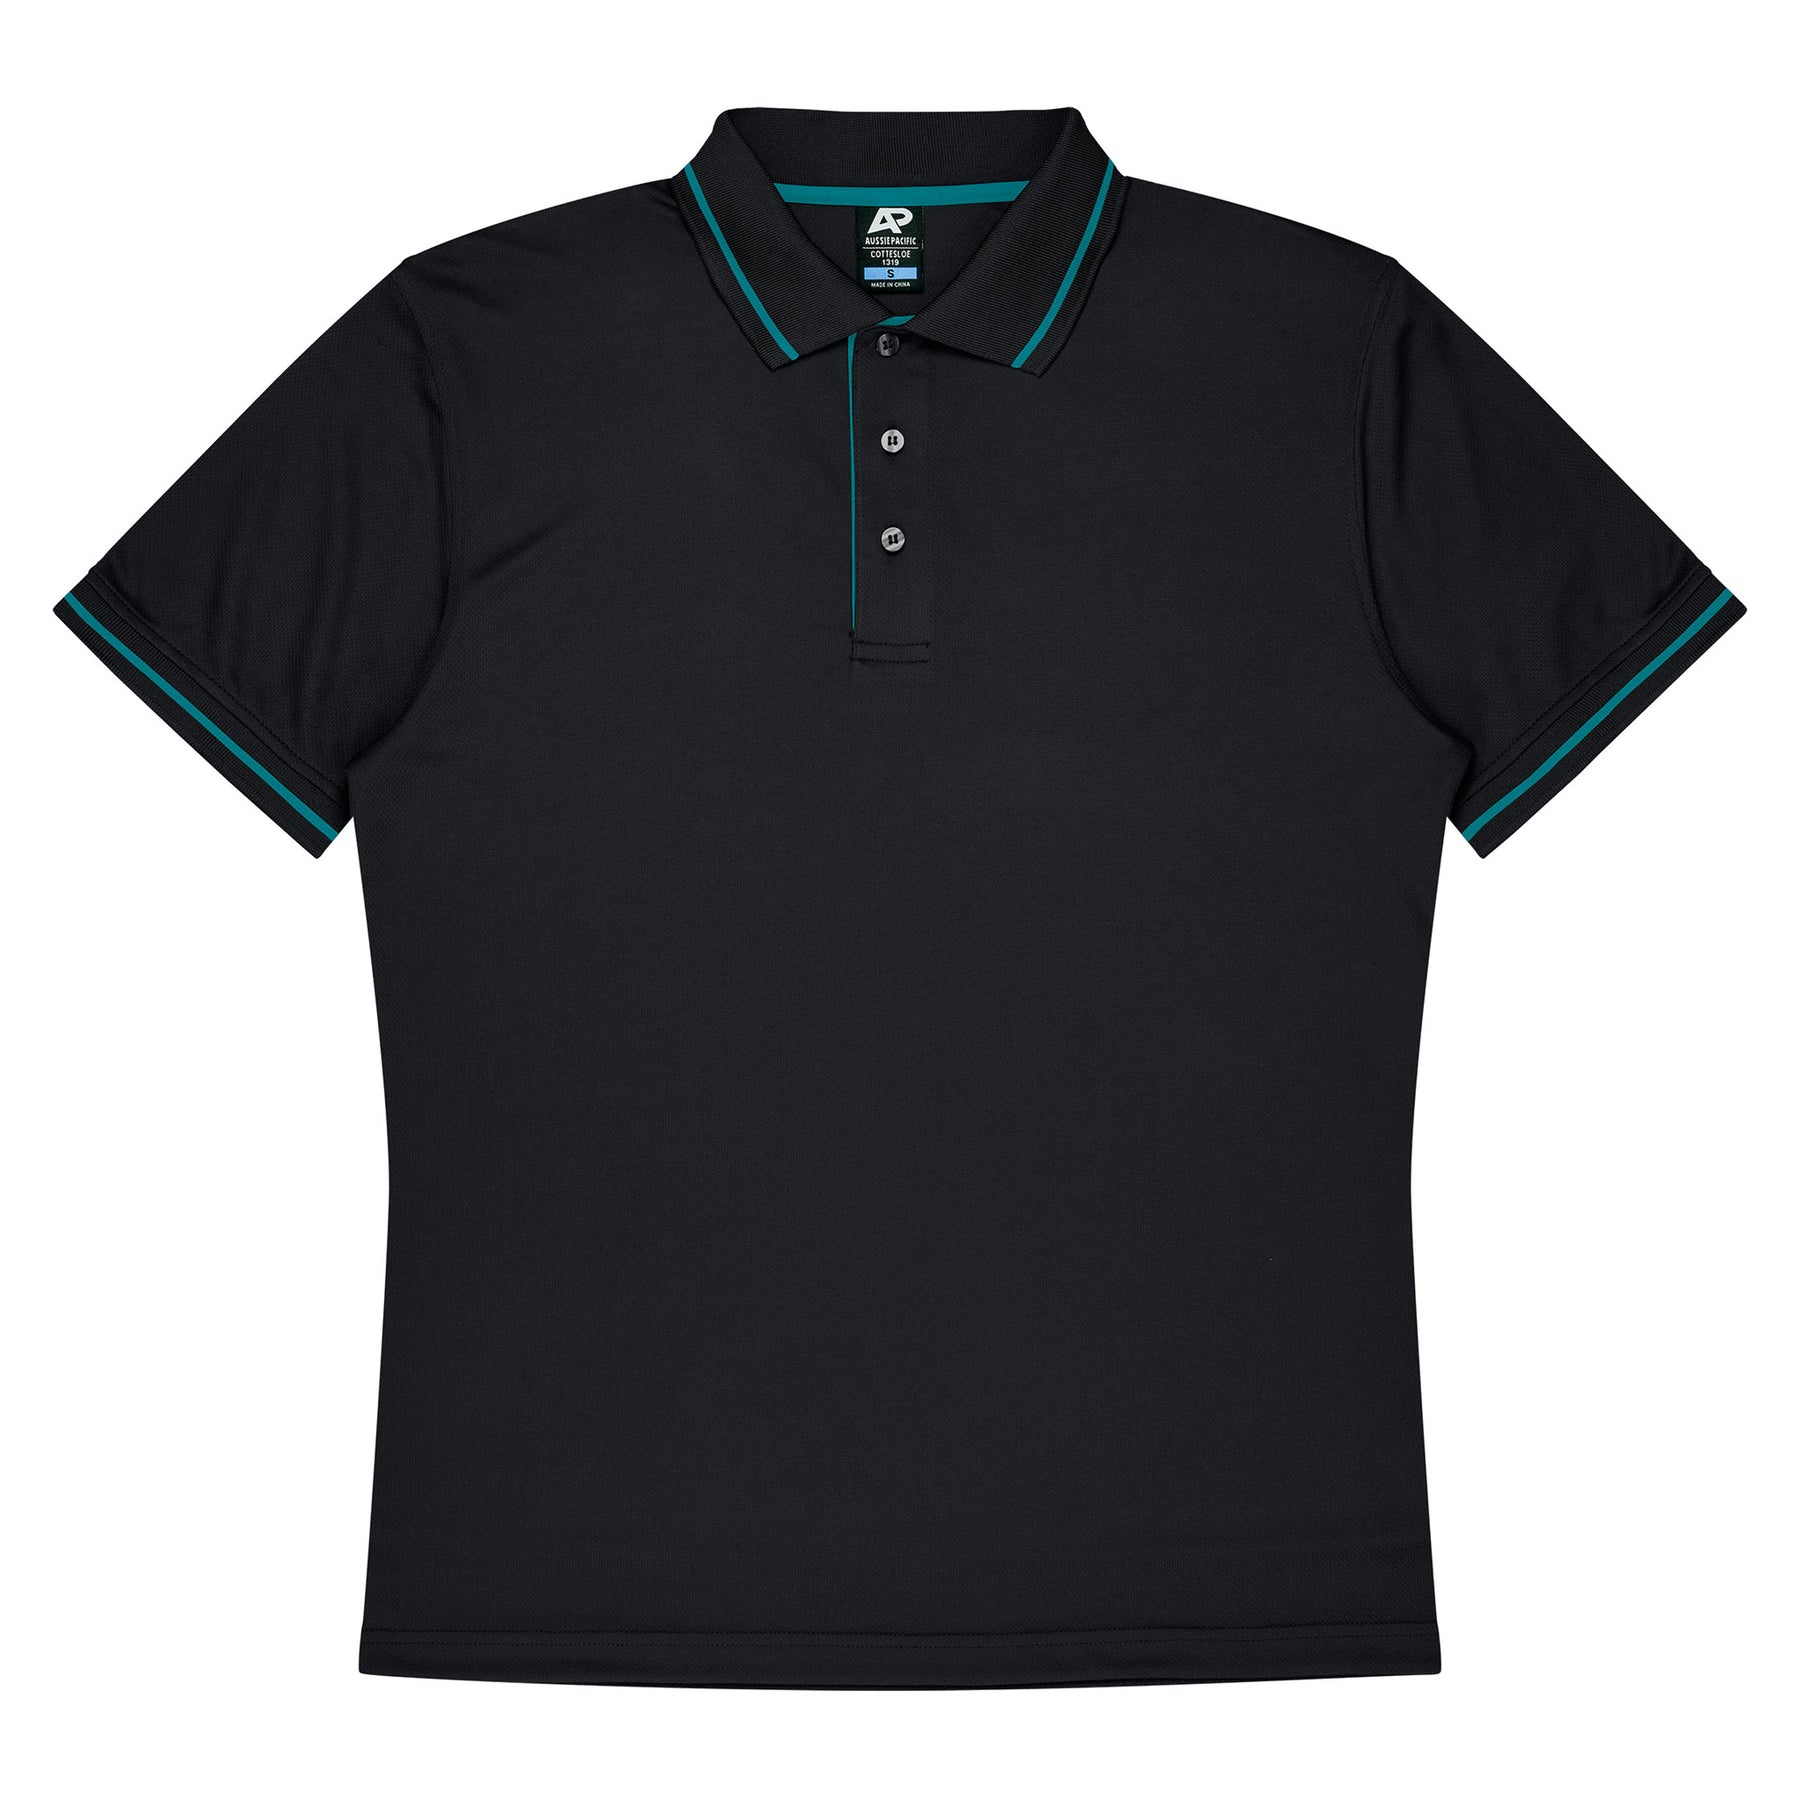 aussie pacific cottesloe mens polo in black teal